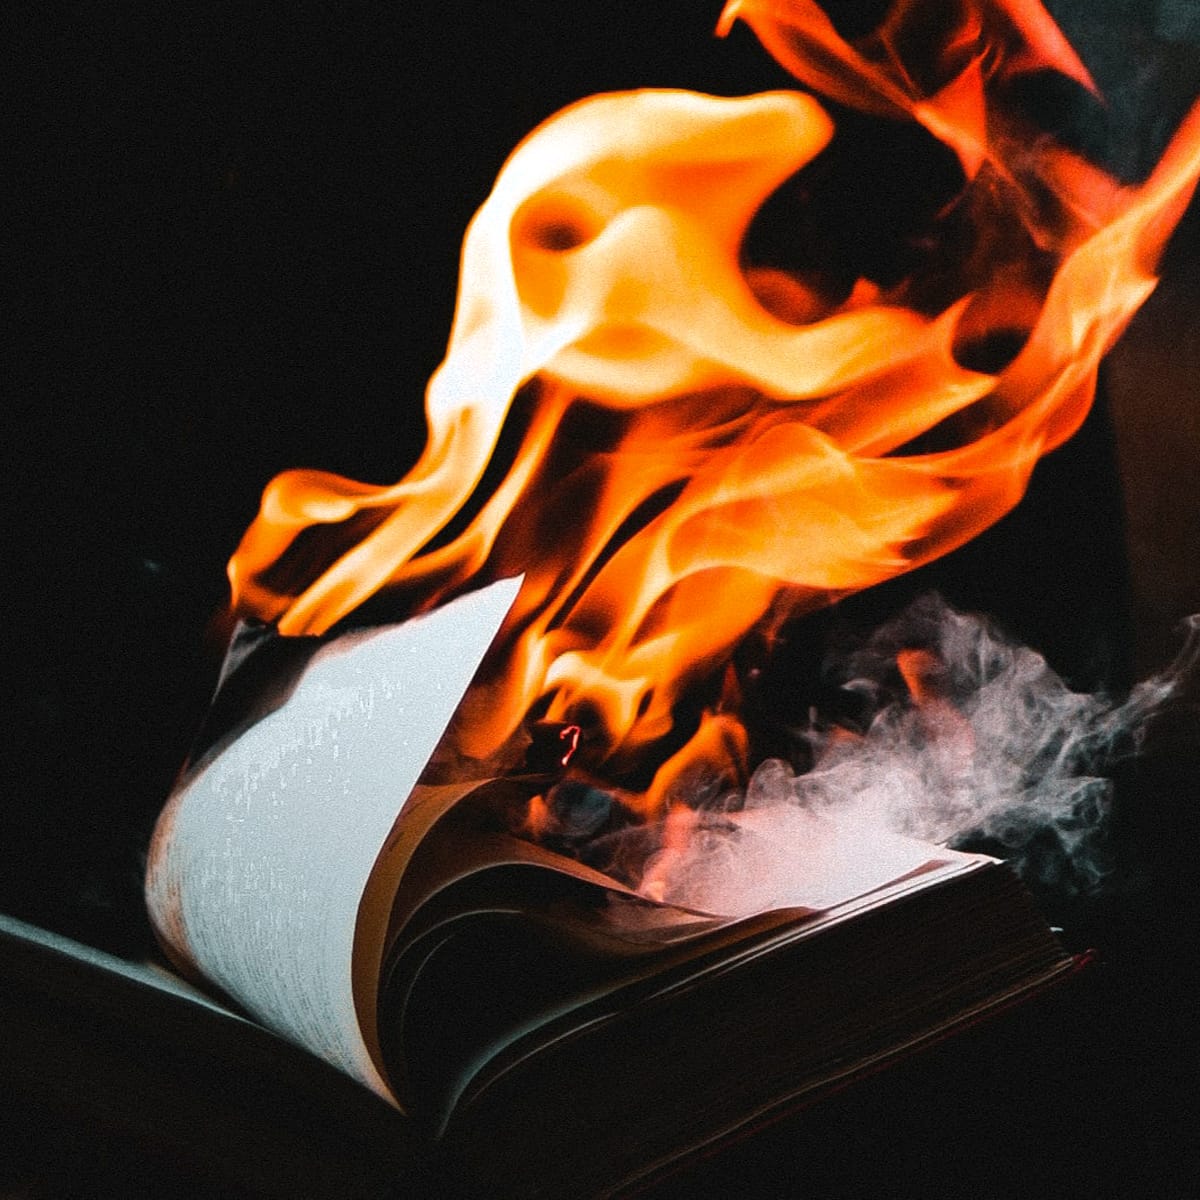 Here's a timeline of book bannings, and burnings.